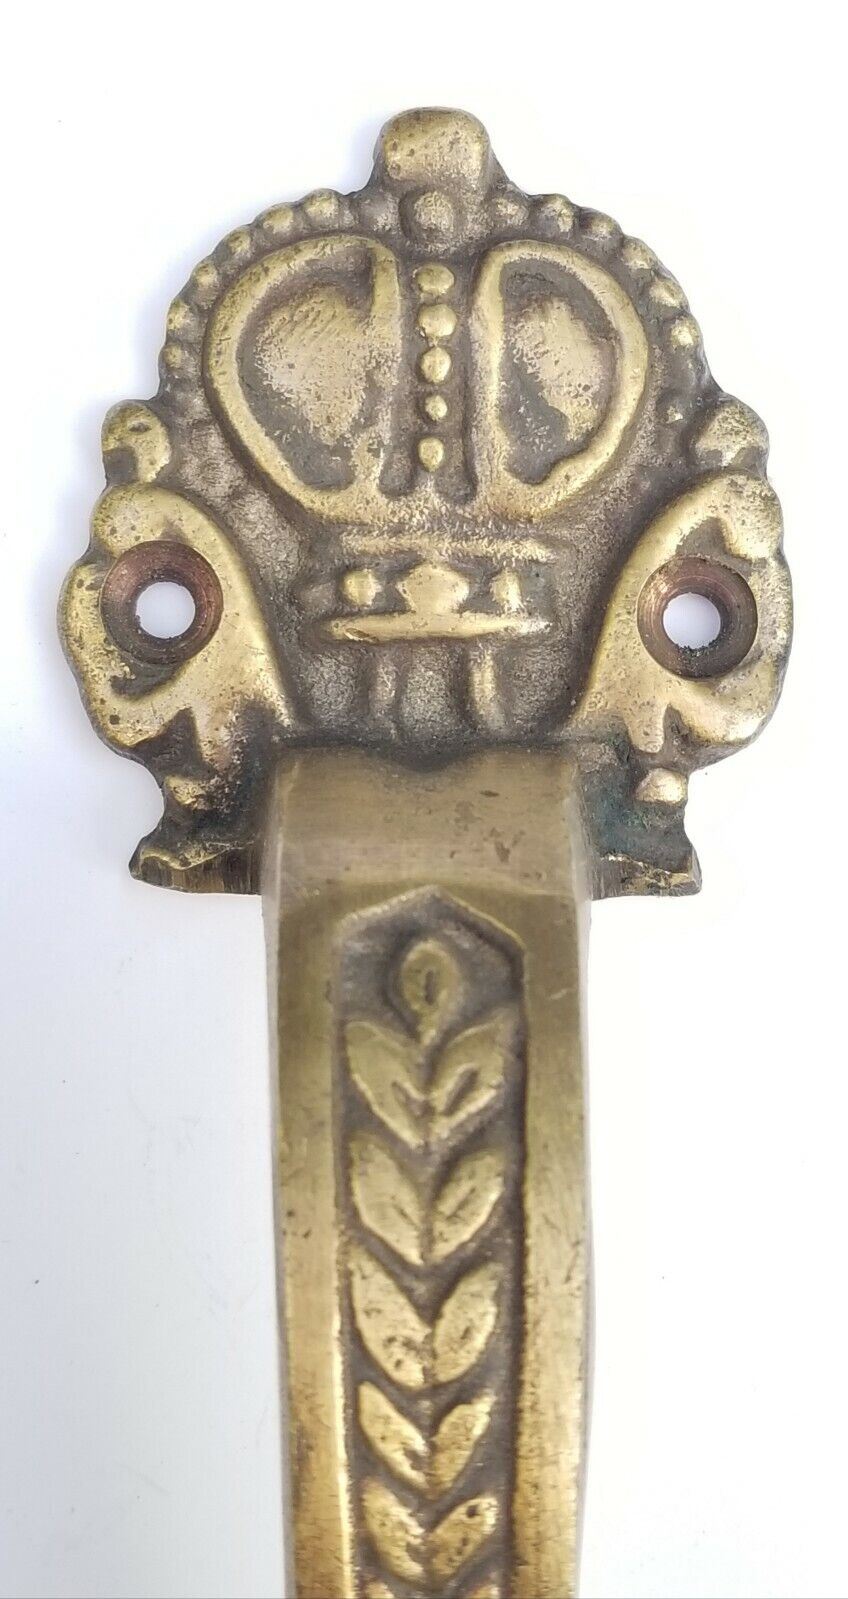 Solid Brass Ant. Style Crown Lg. Handle 6-3/4" Pull Door Cabinet Barn Gate #P10